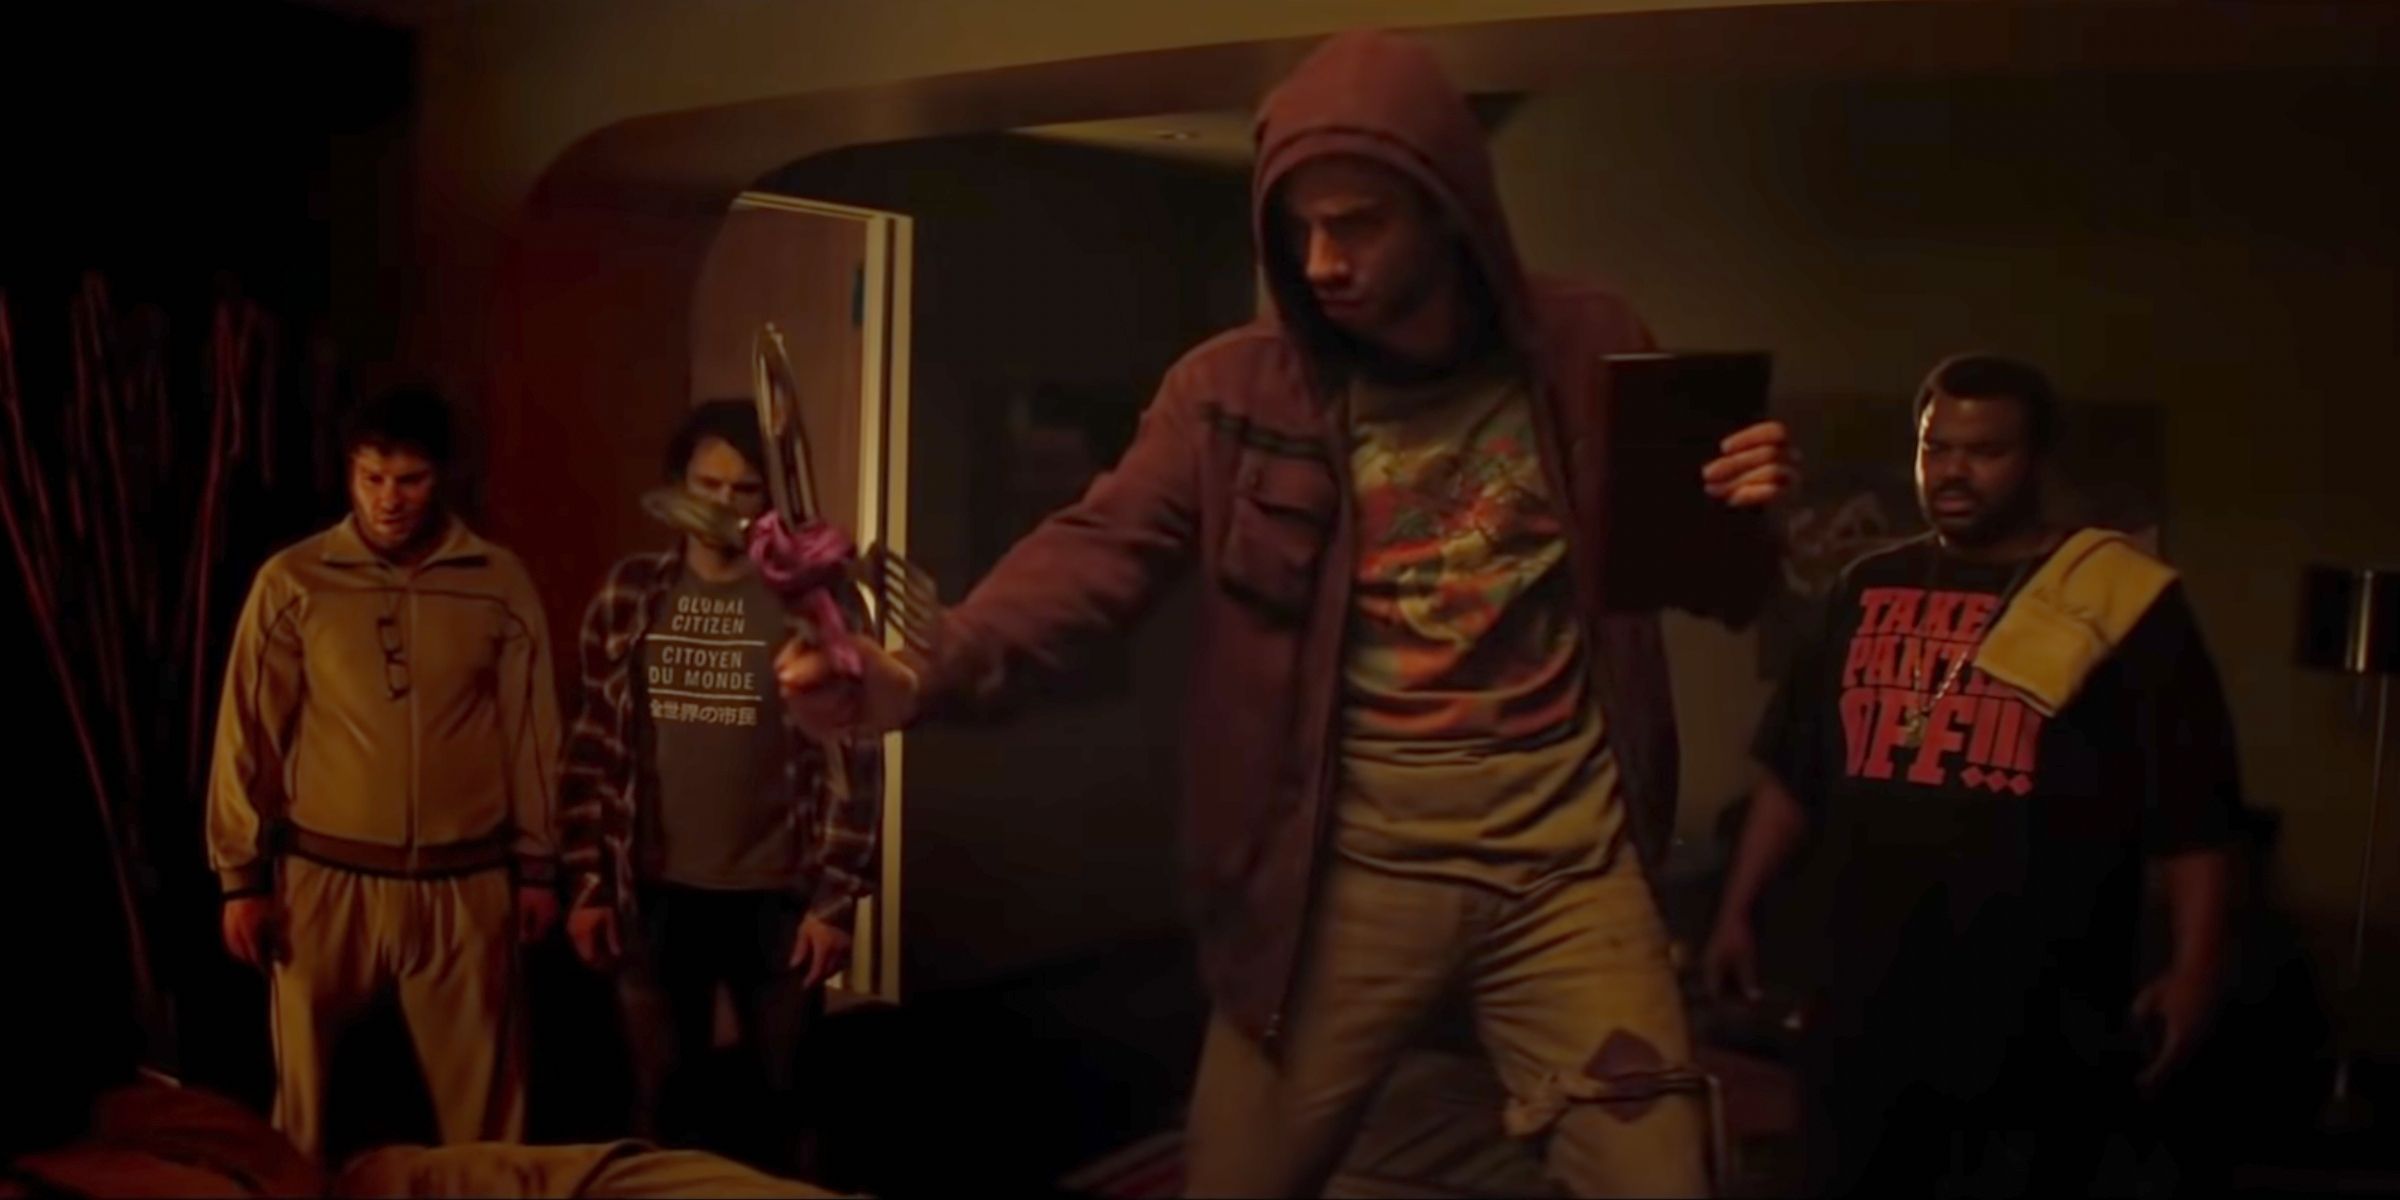 Jay Baruchel performs and exorcism on Jonah Hill in 'This is the End'